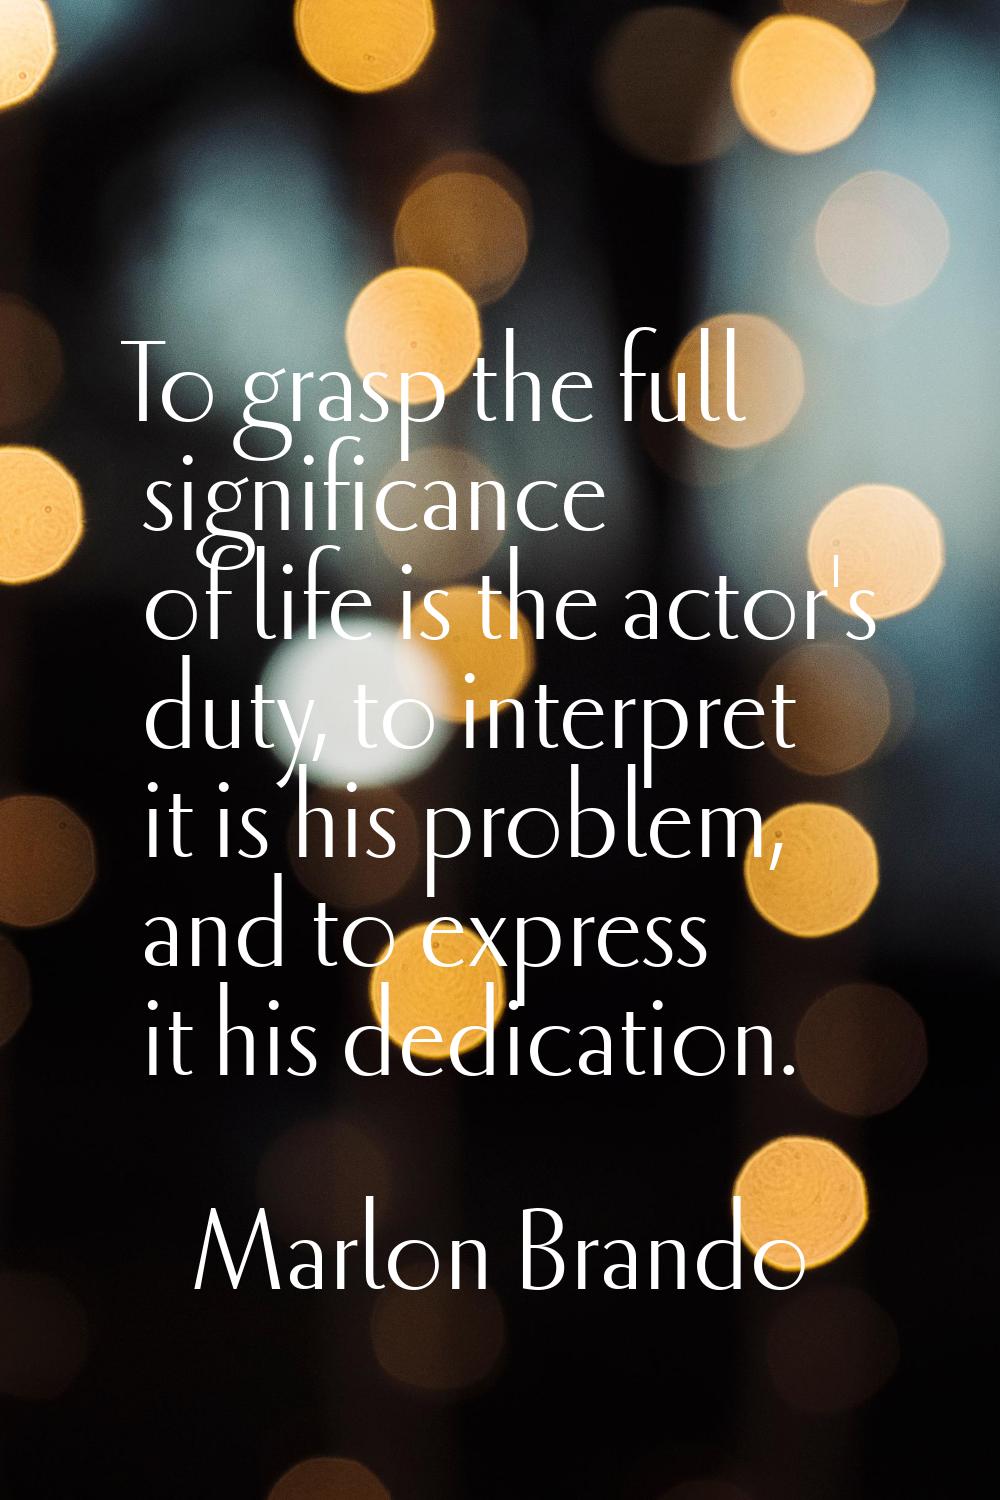 To grasp the full significance of life is the actor's duty, to interpret it is his problem, and to 